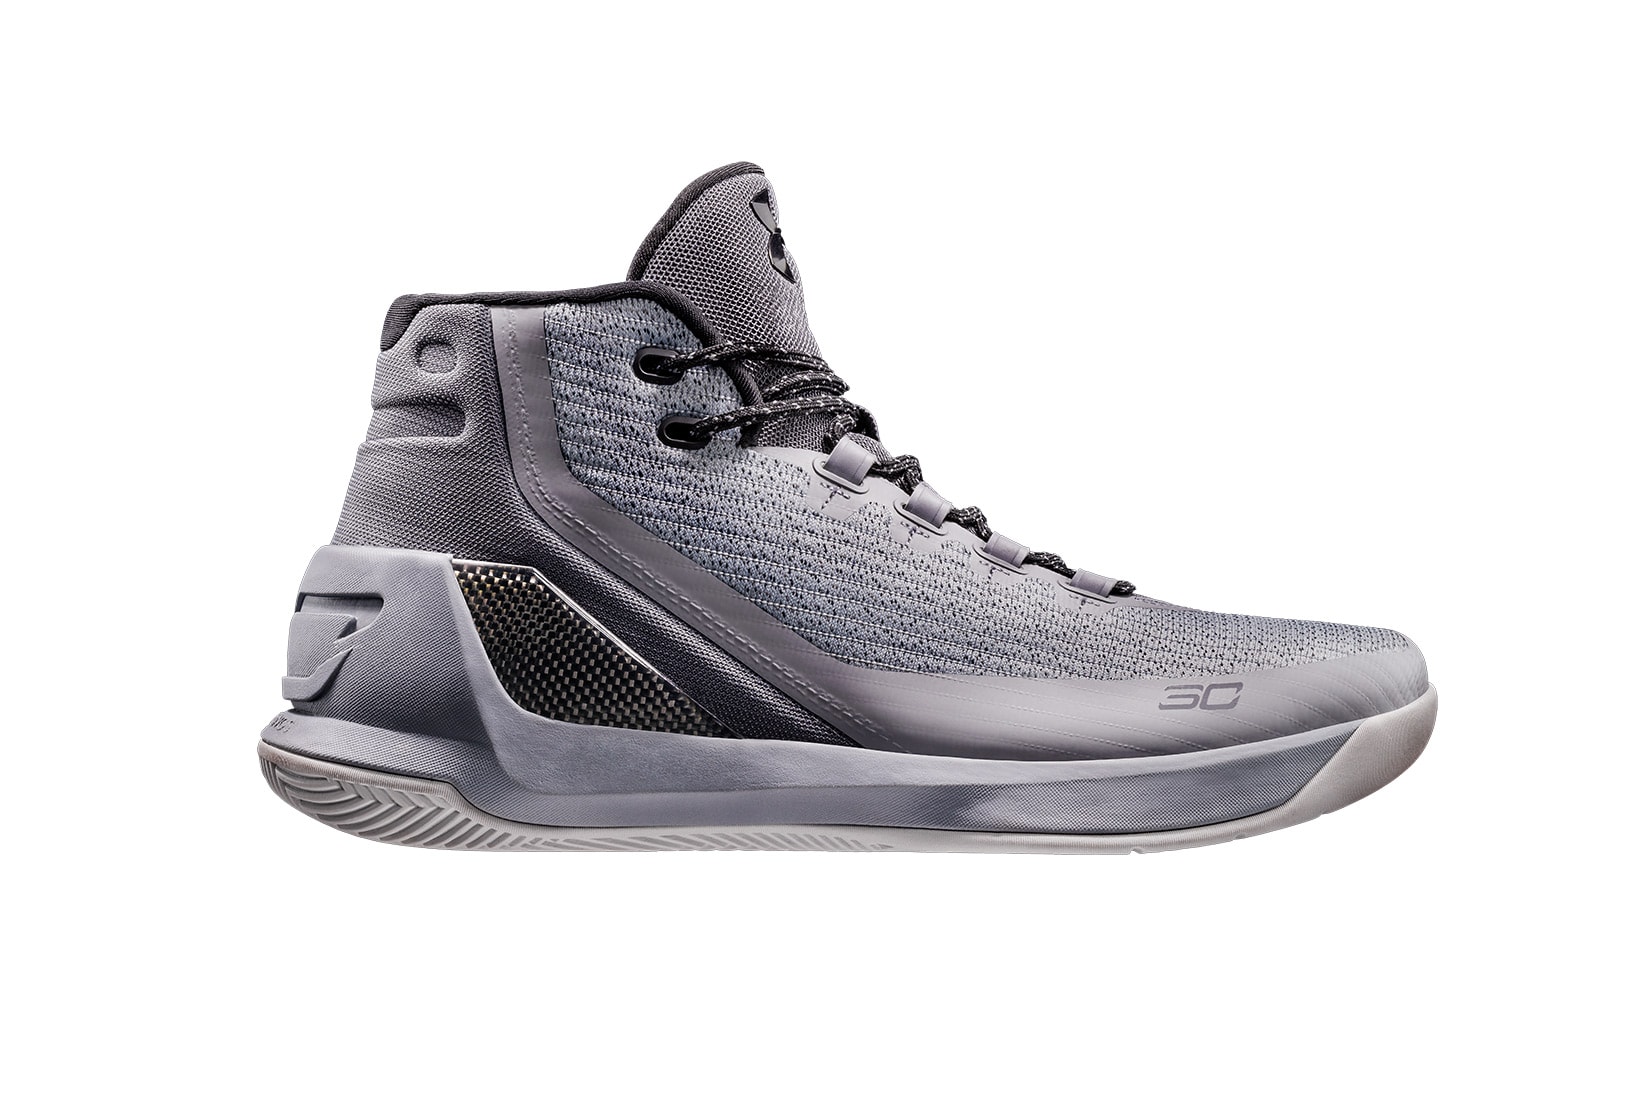 Under Armour Curry 3 Grey Matter